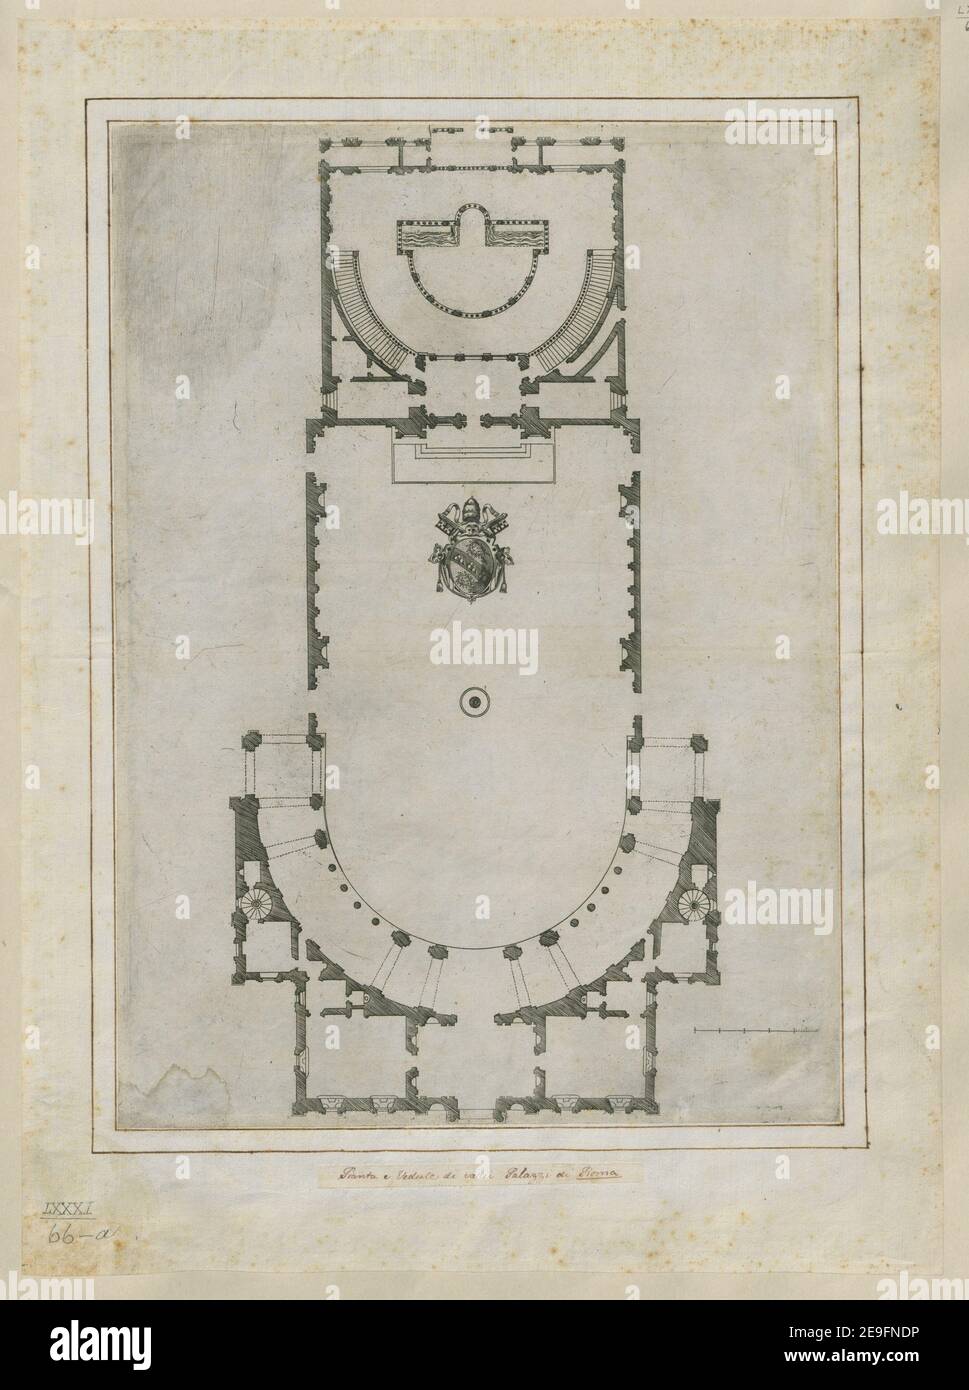 Plan of the Villa Giulia  Author  LafreÃÅry, Antoine 81.66.a. Place of publication: [Rome] Publisher: [Antoine LafreÃÅry] Date of publication: [1550s]  Item type: 1 print Medium: etching Dimensions: sheet 41.3 x 29.9 cm (trimmed below platemark)  Former owner: George III, King of Great Britain, 1738-1820 Stock Photo